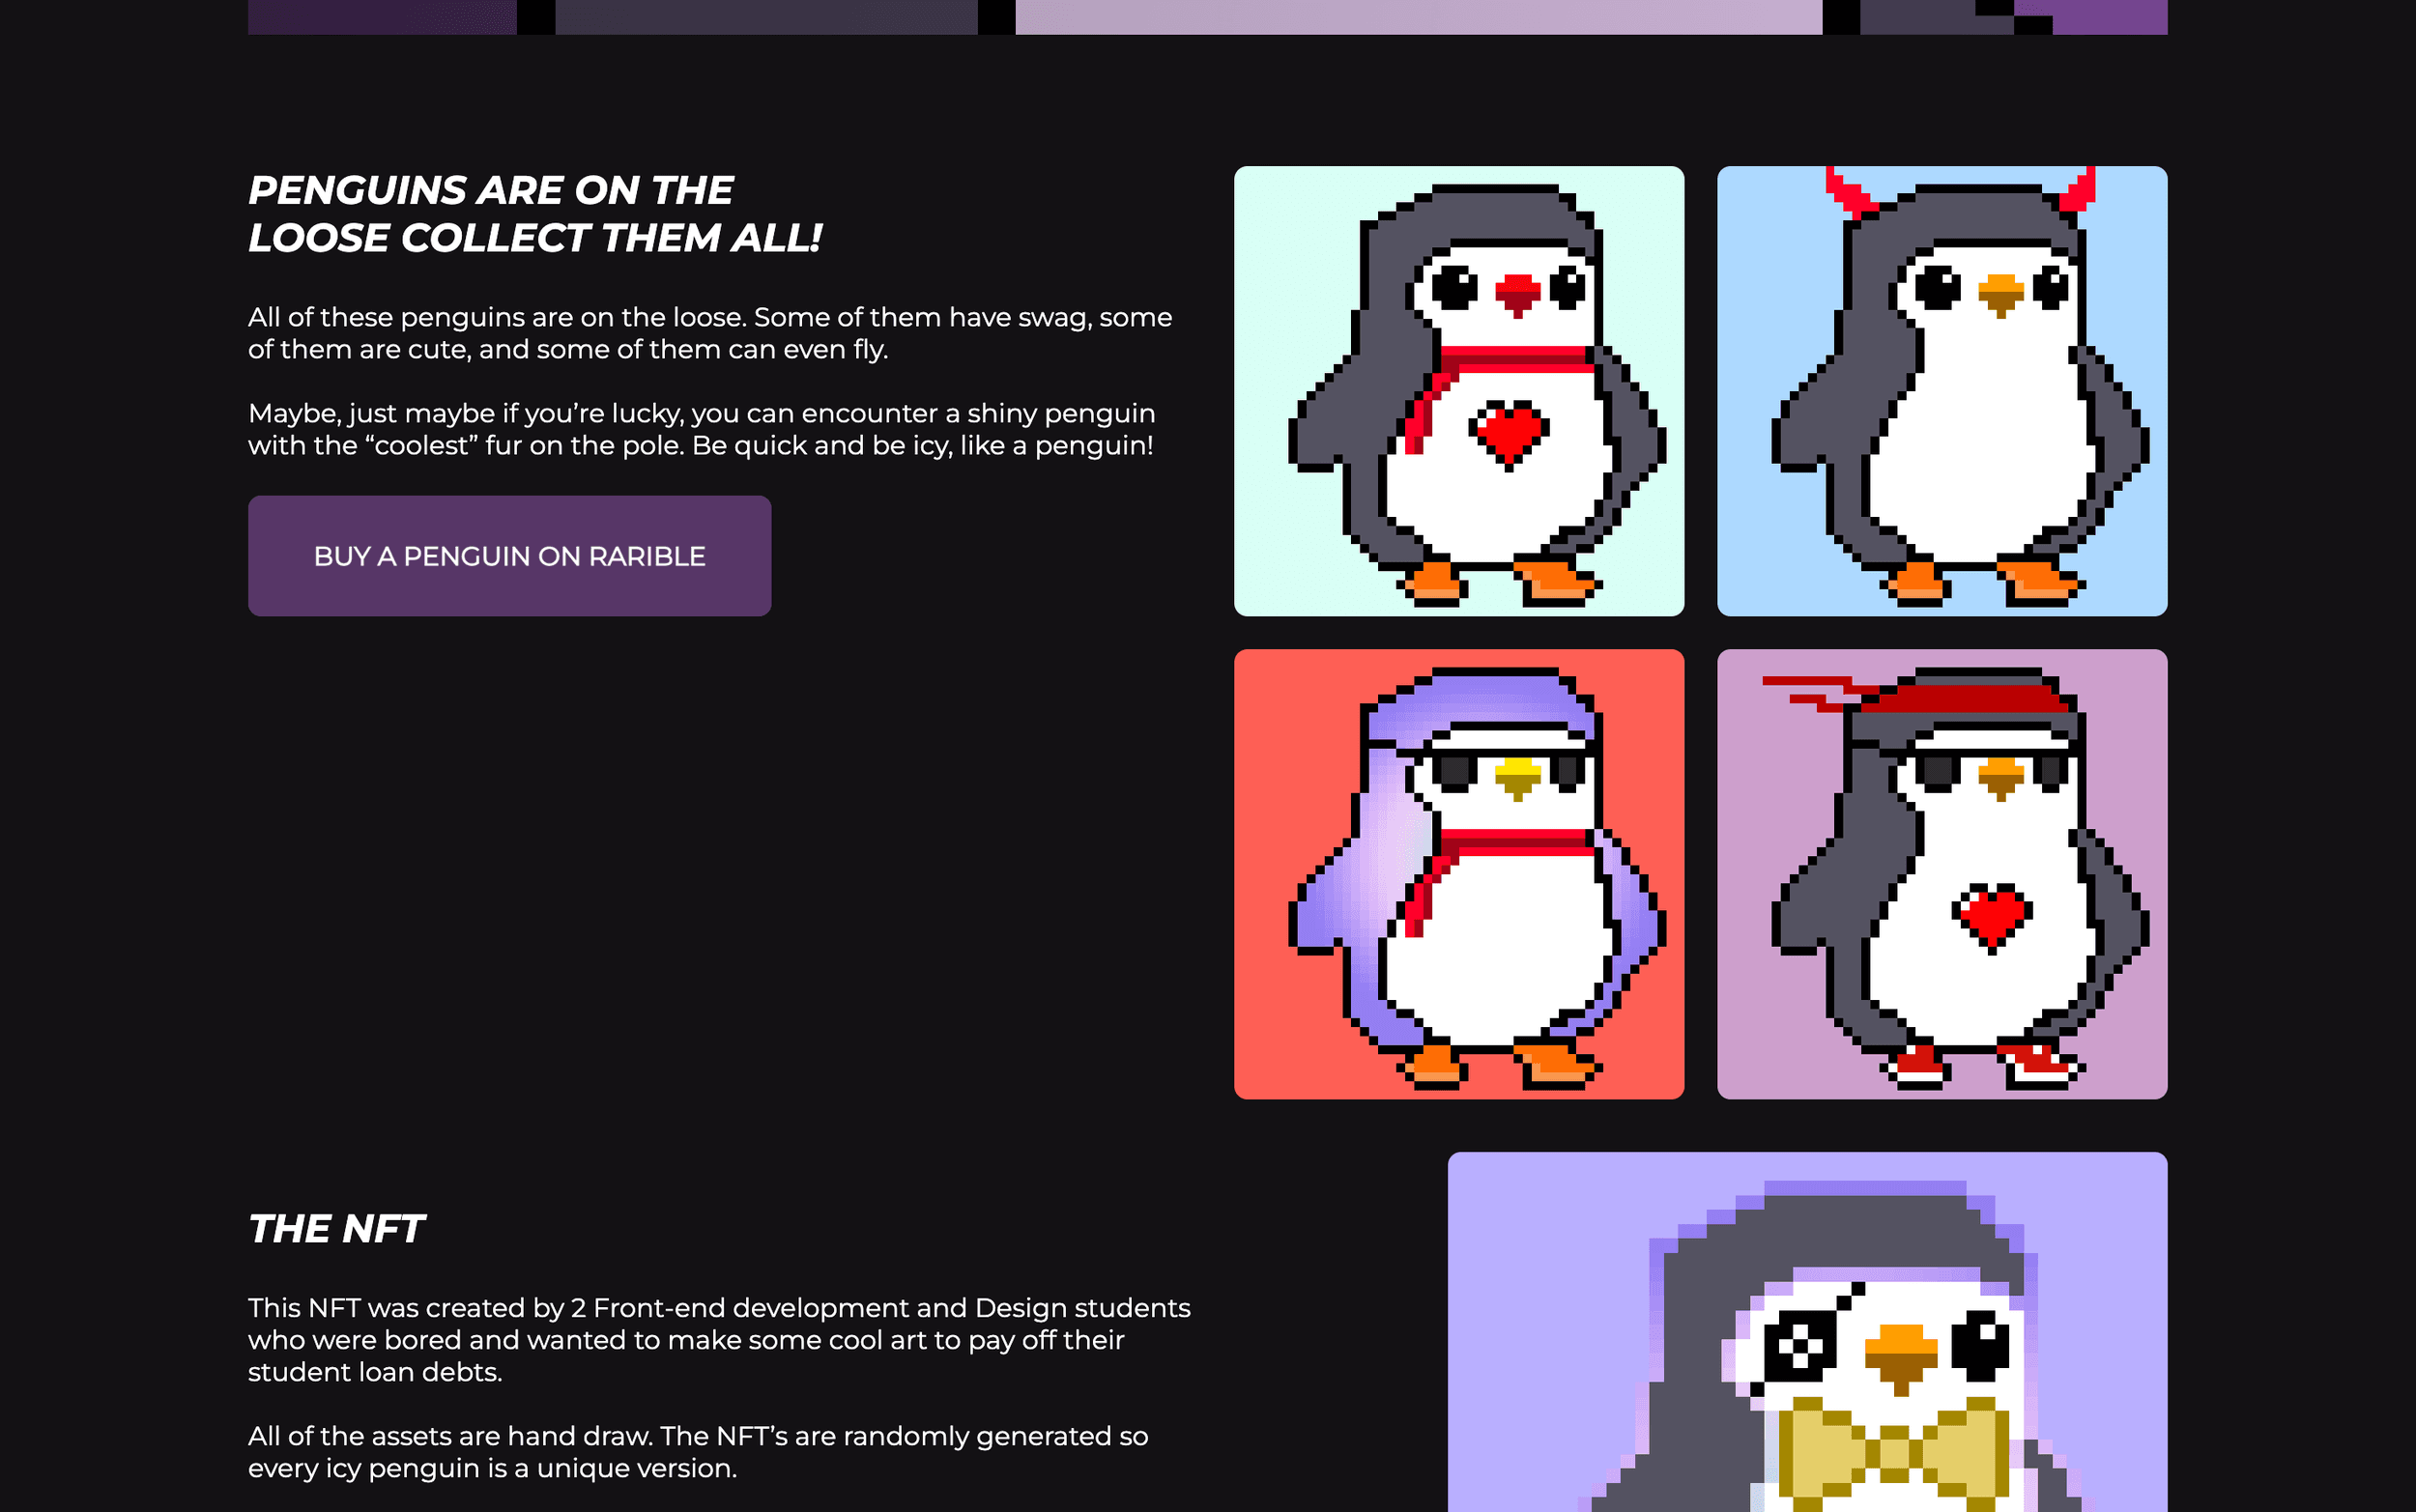 Icy Penguins - About